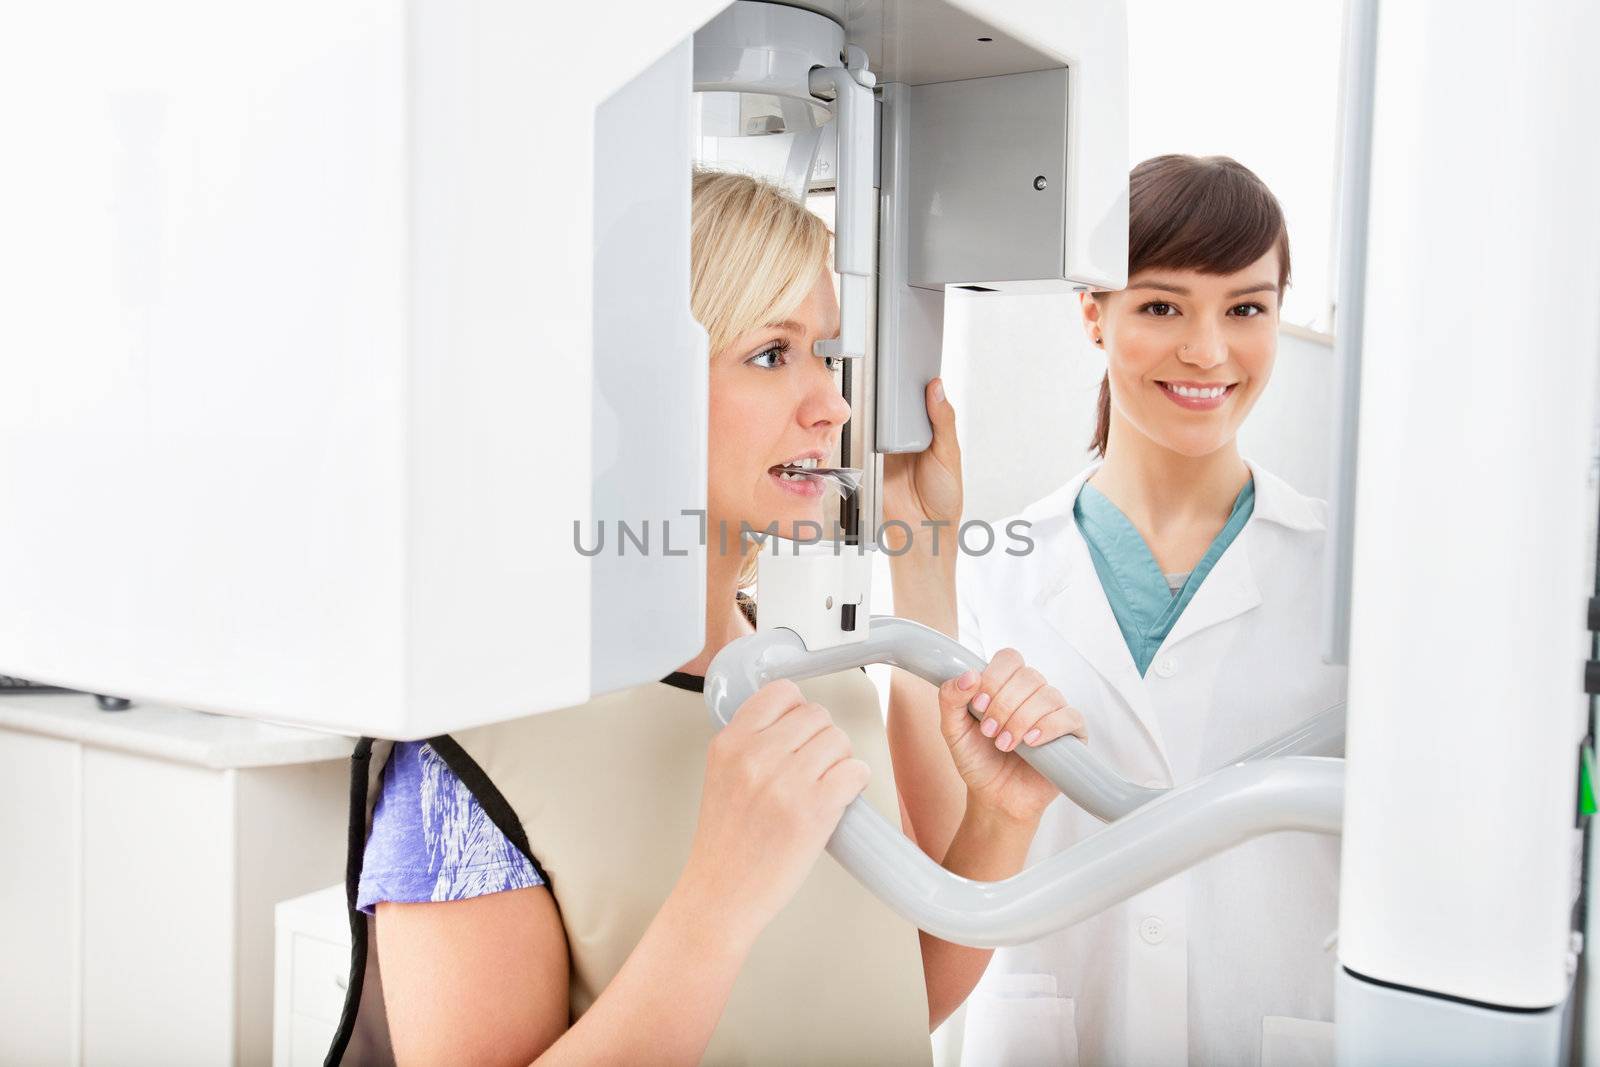 Panoramic Dental X-ray by leaf